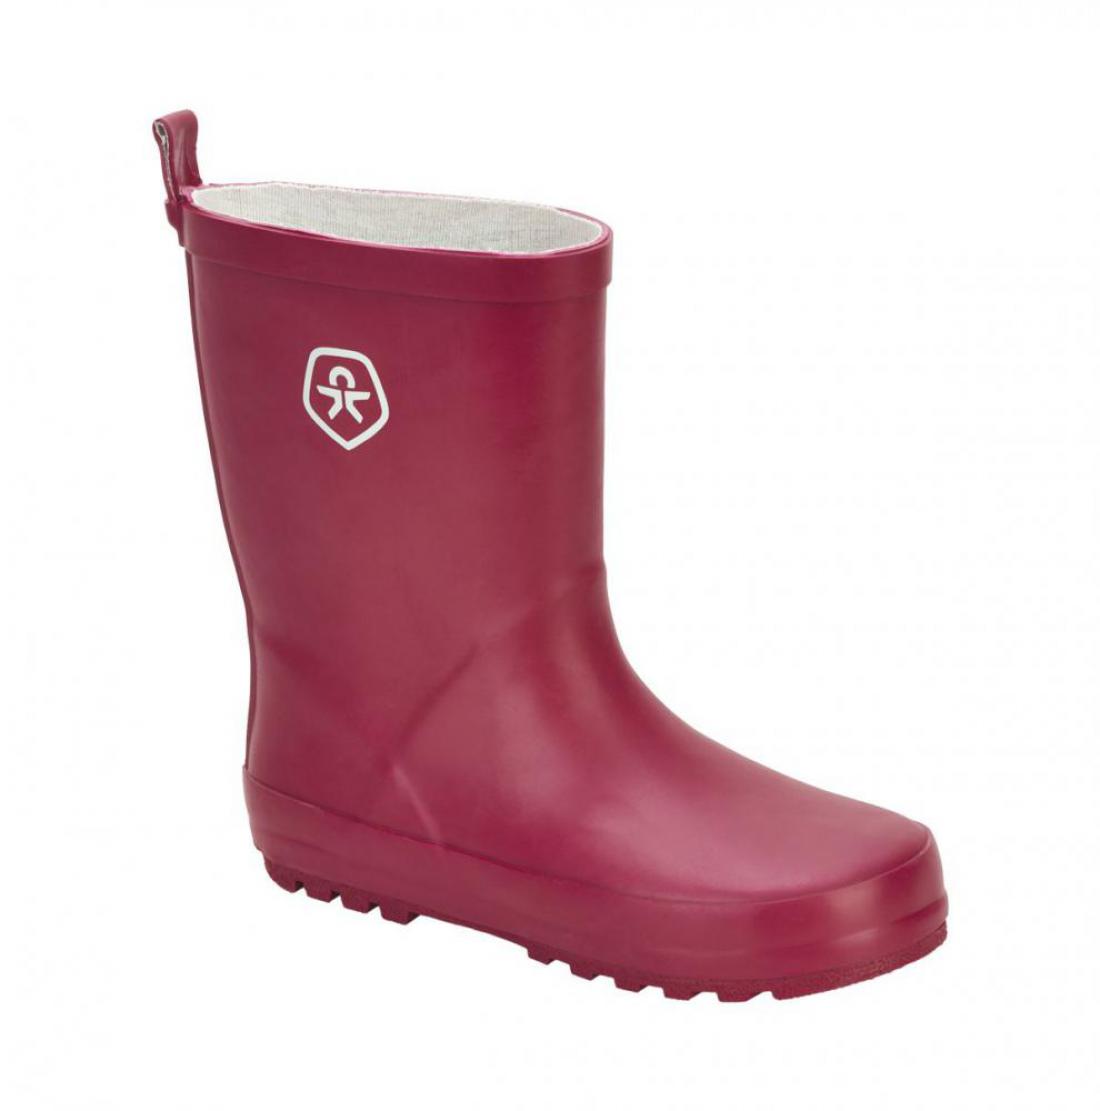 Wellies, beet red